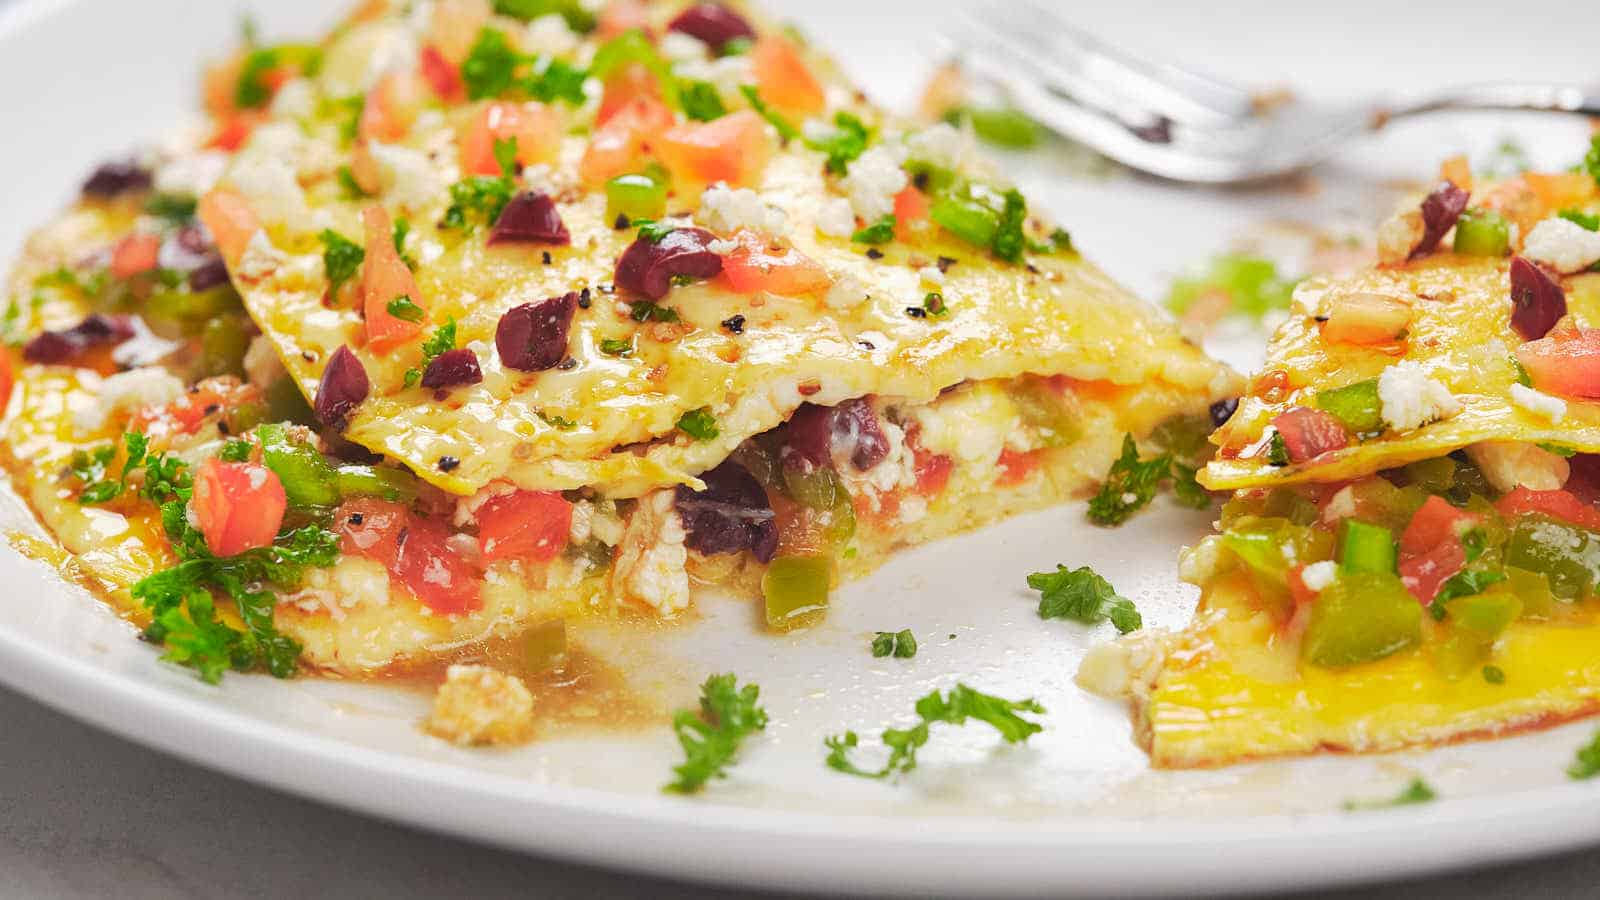 A plated serving of Mediterranean omelet filled with various ingredients.